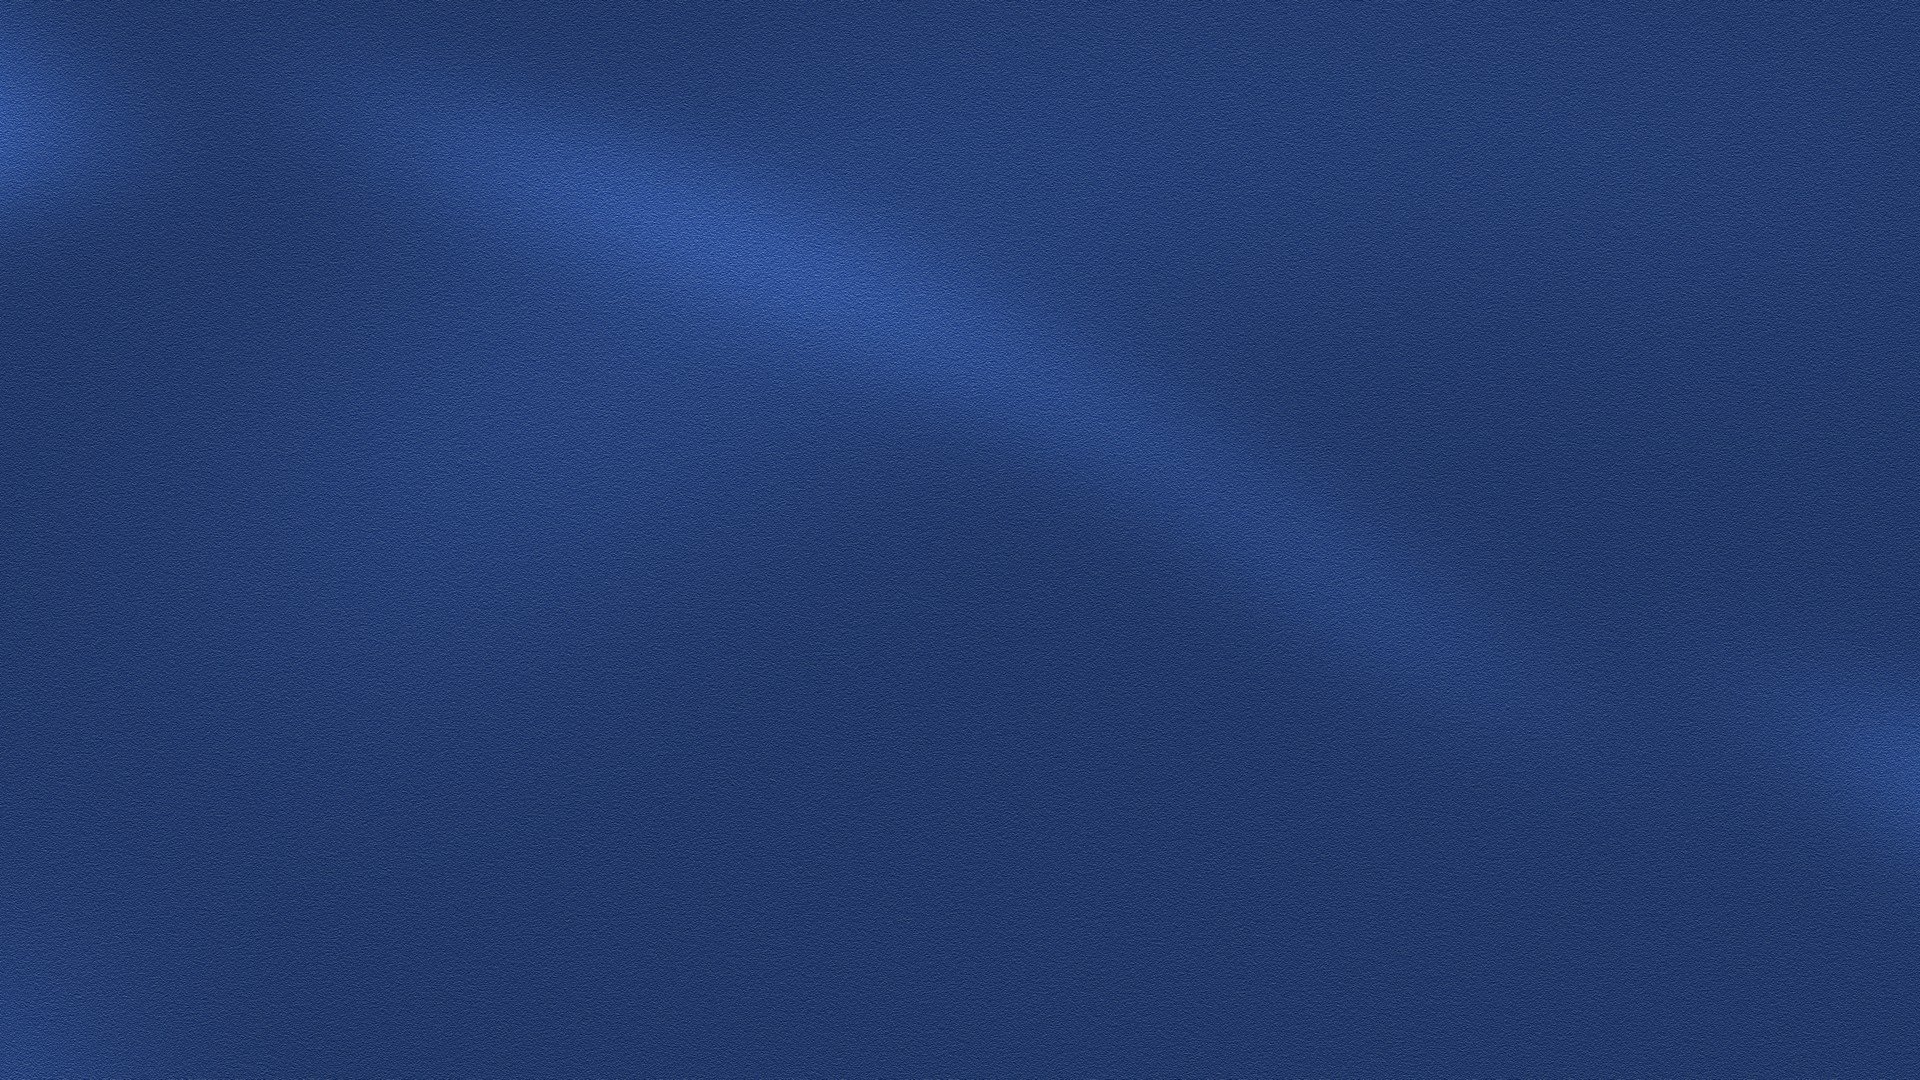 Blue Surface Textures Background Wallpaper